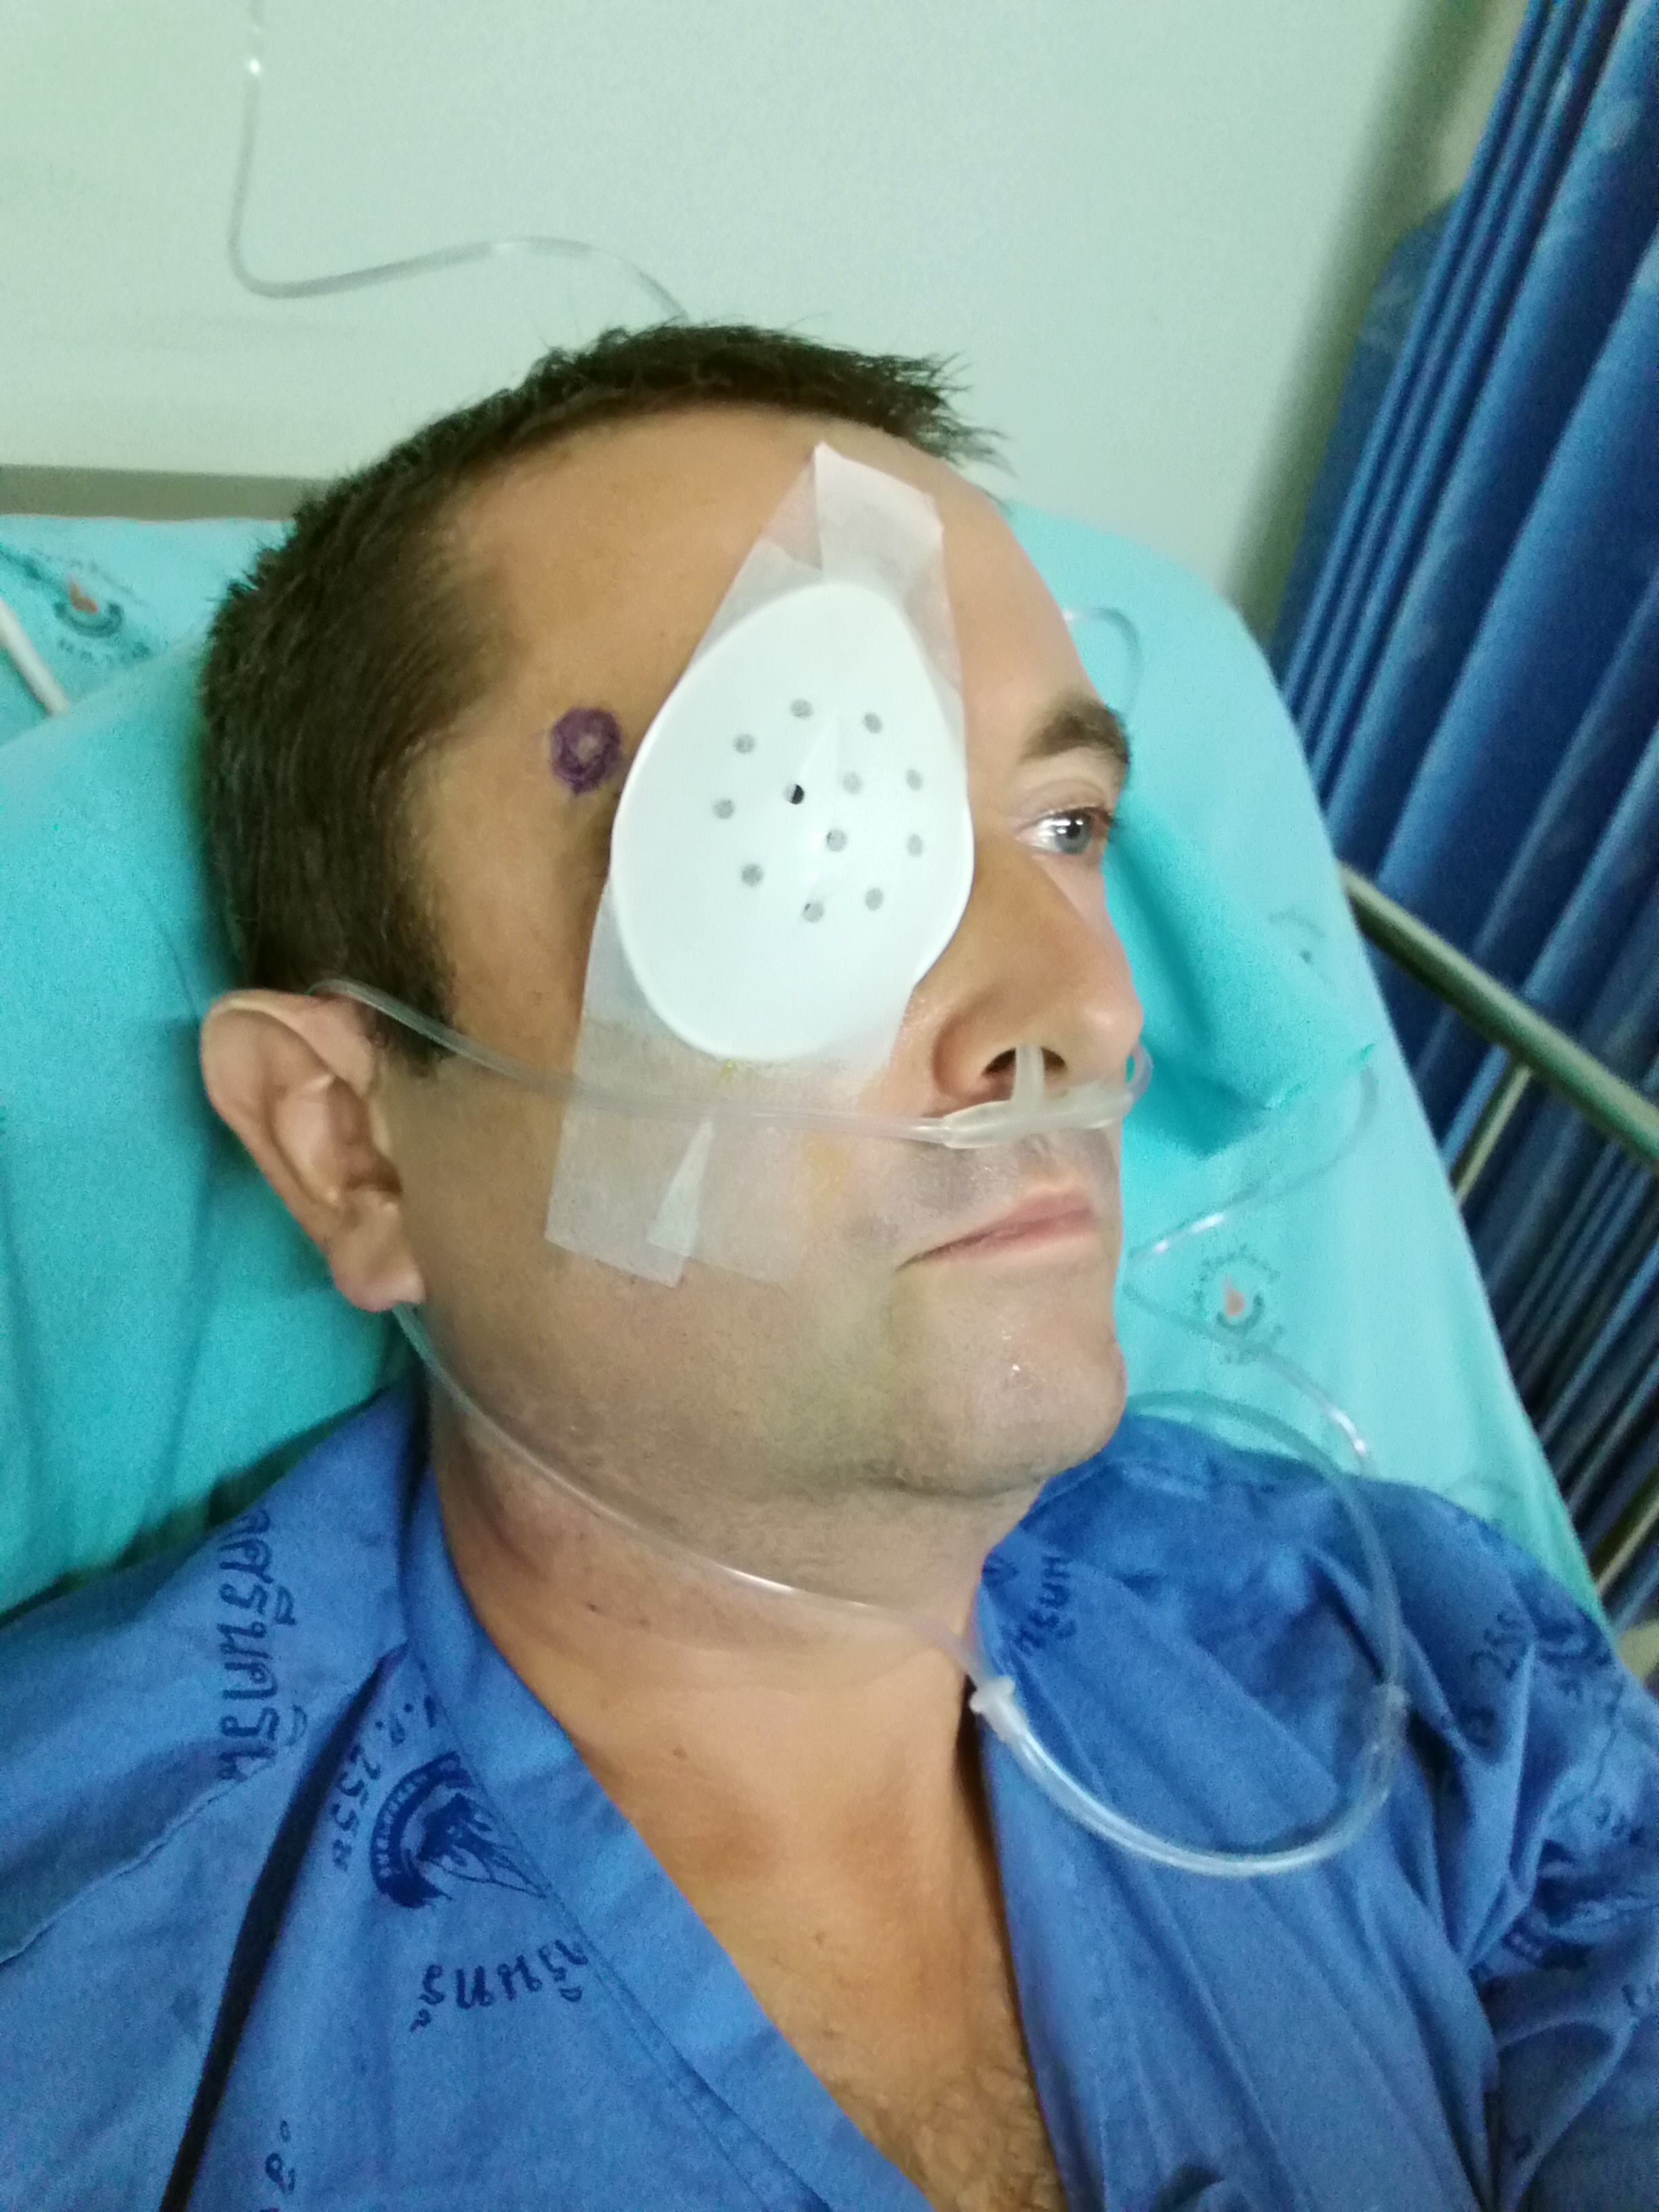 Steven Howard in a Thai hospital a few hours prior to the operation to have his right eye removed. They blue mark is there to ensure the surgeon does not make a mistake and remove the wrong eye!